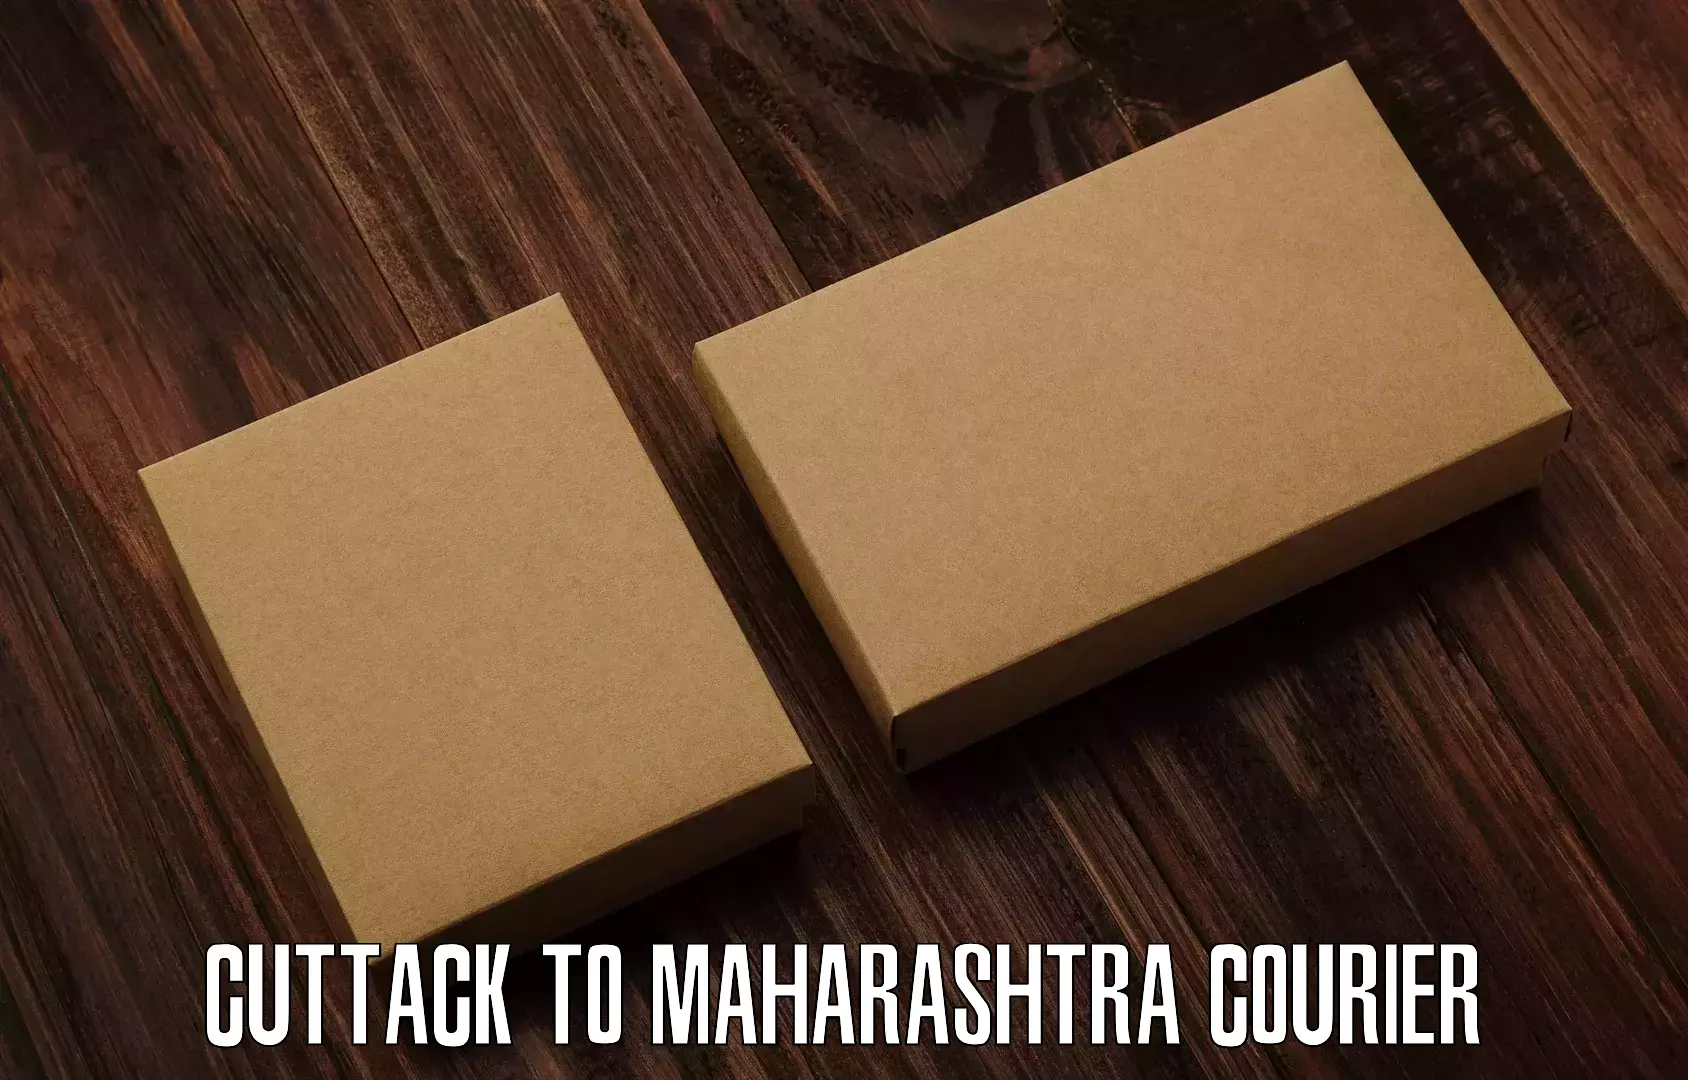 High-speed parcel service Cuttack to Maharashtra